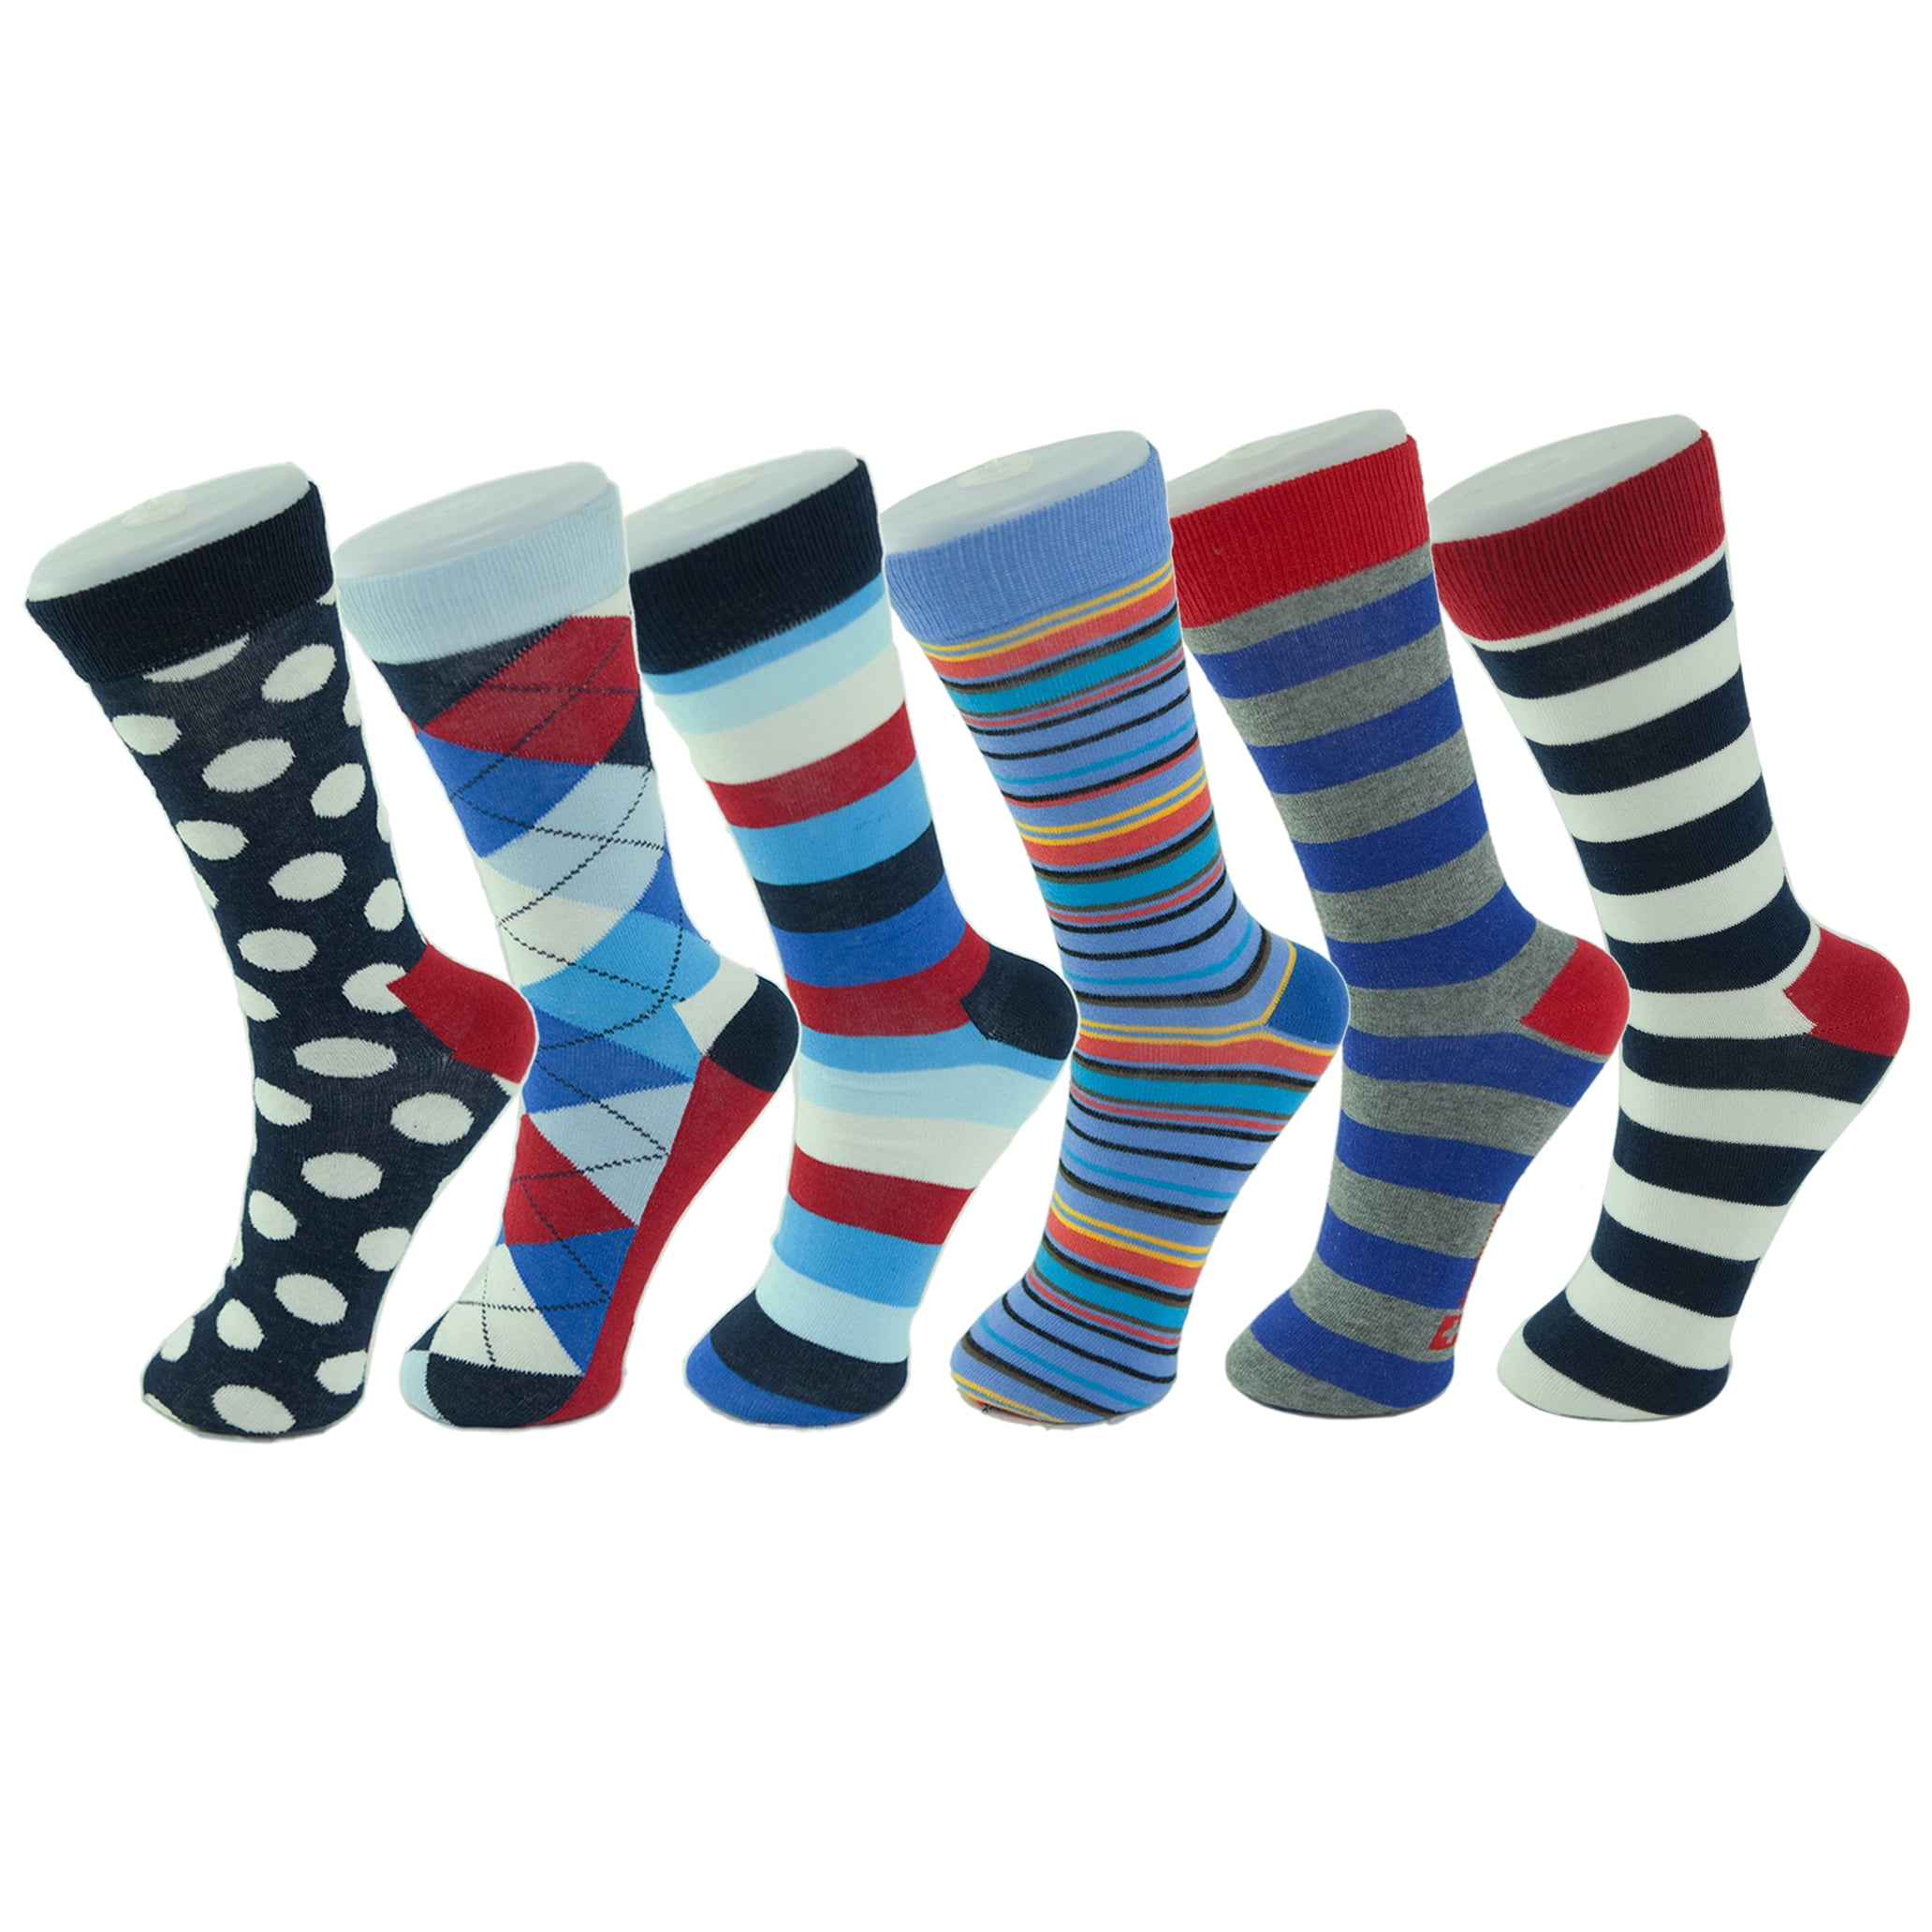 Mens Dress Socks Business Casual Work Argyle Solid Pattern Cotton Crew Sock 5 Pack 